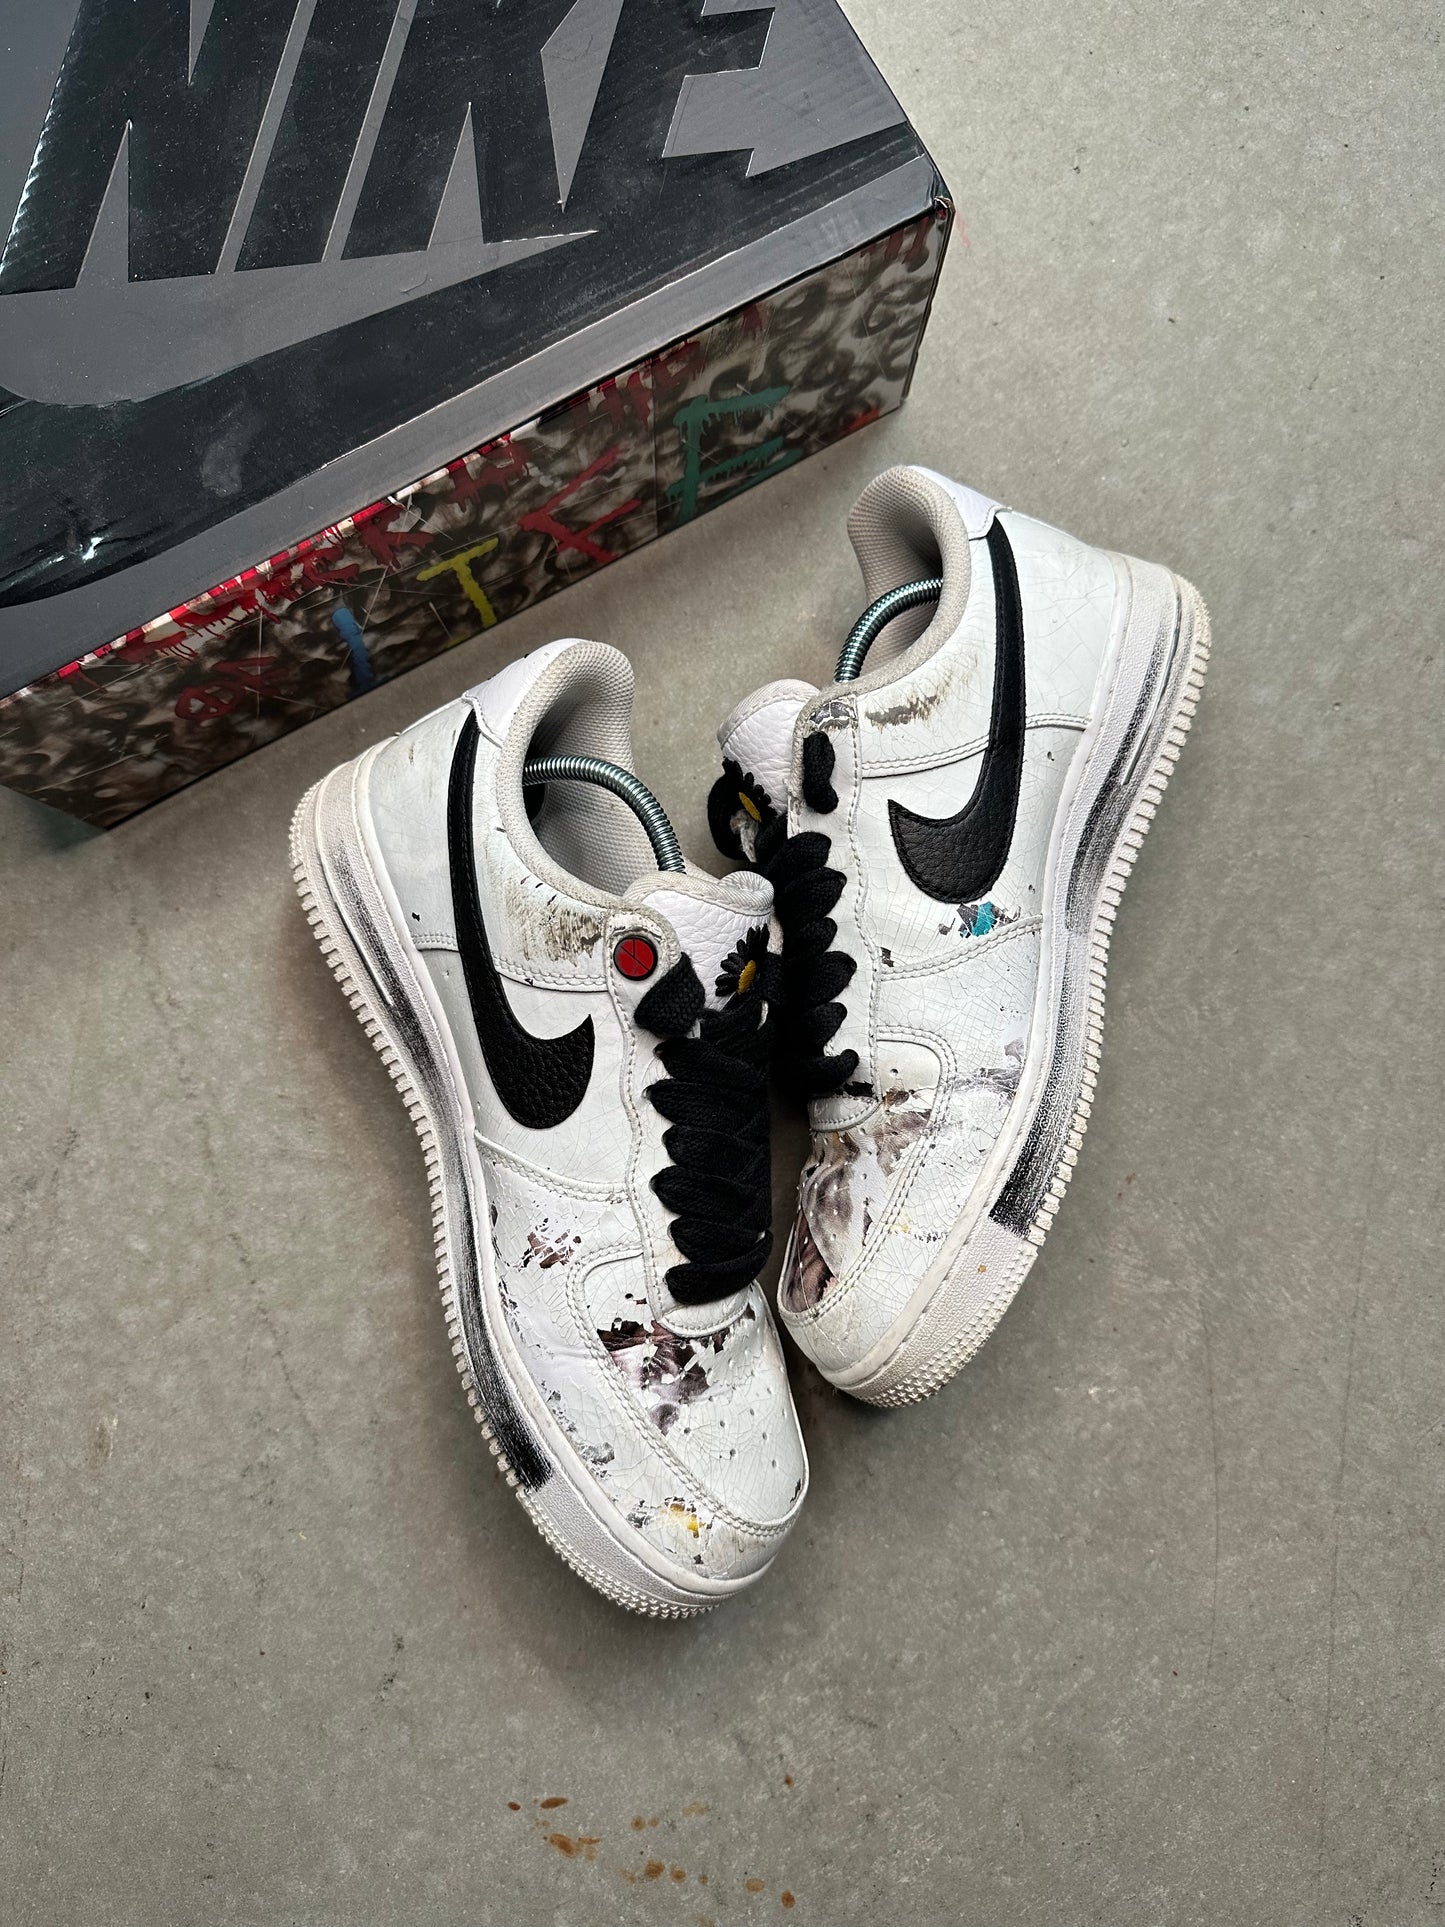 PEACEMINUSONE x G-Dragon x Nike Air Force 1 Low “Paranoise” Size 8.5 PO OG